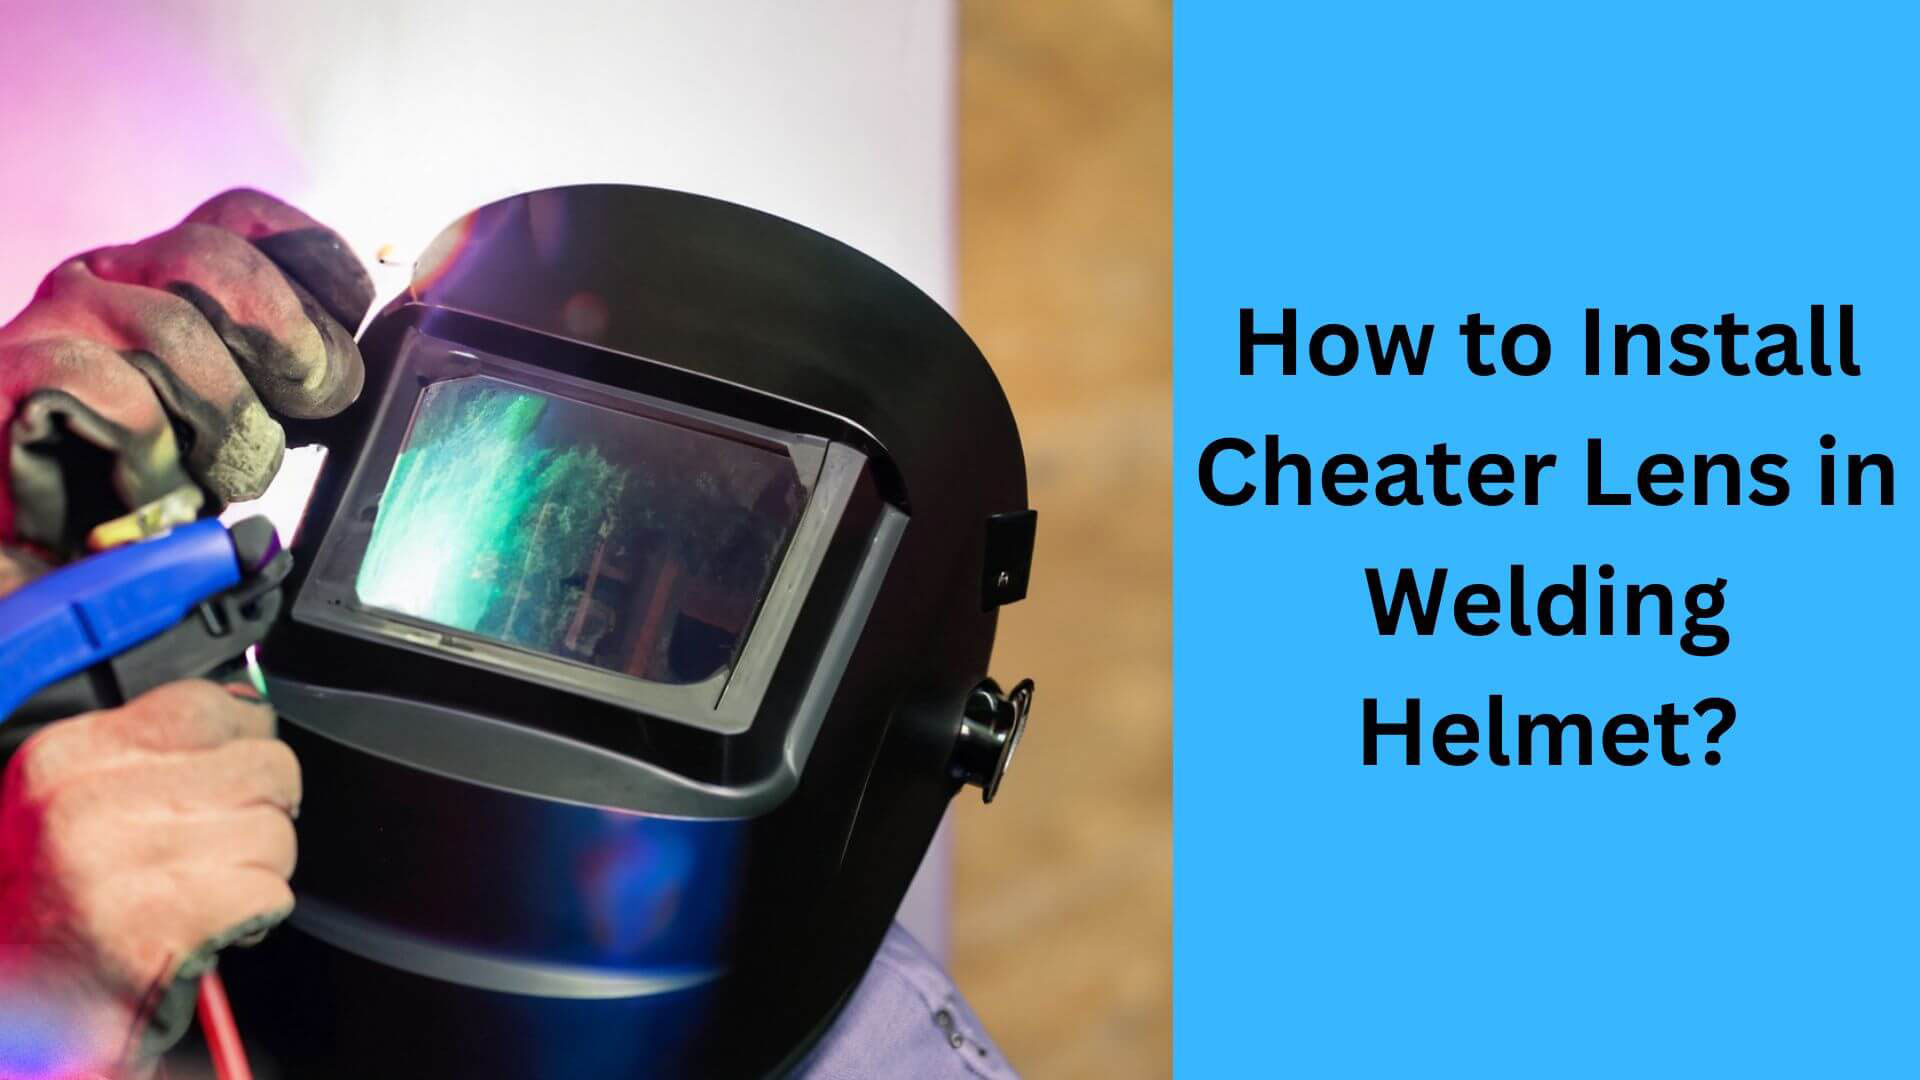 How to Install Cheater Lens in Welding Helmet? A Welder’s Essential Guide